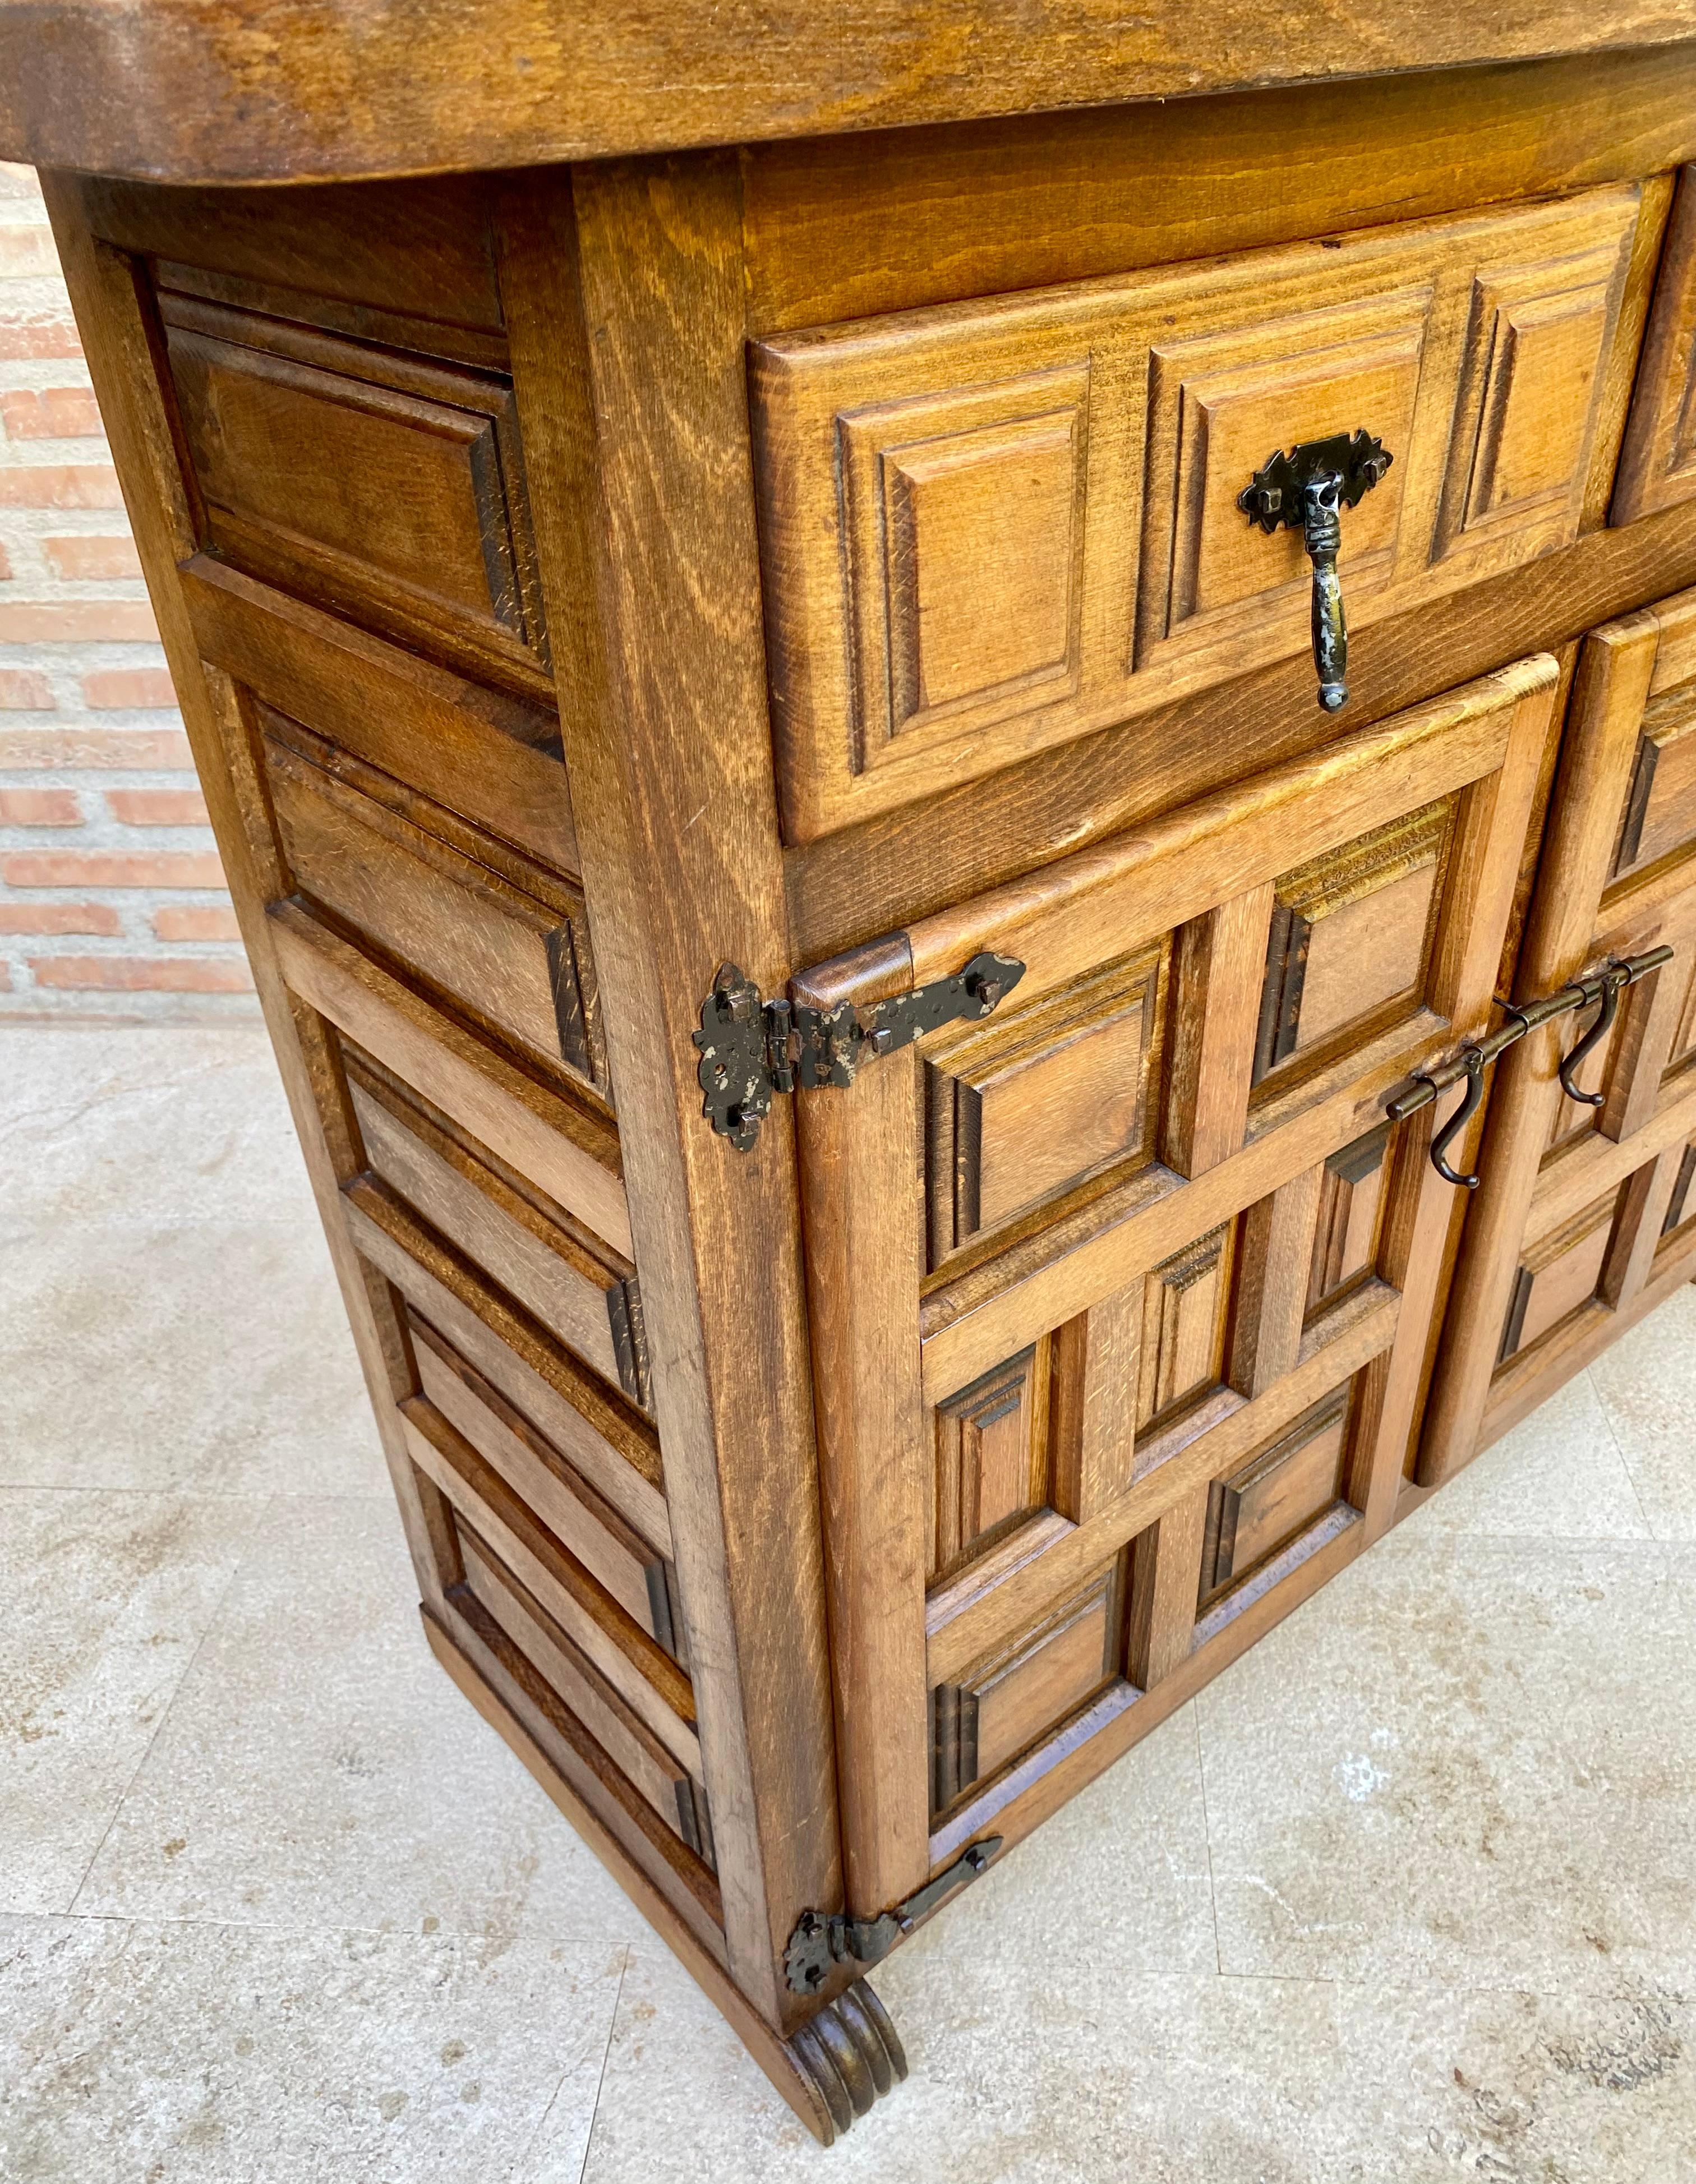 Spanish Catalan Carved Walnut Chest of Drawers, Highboy or Console, 1920s For Sale 3